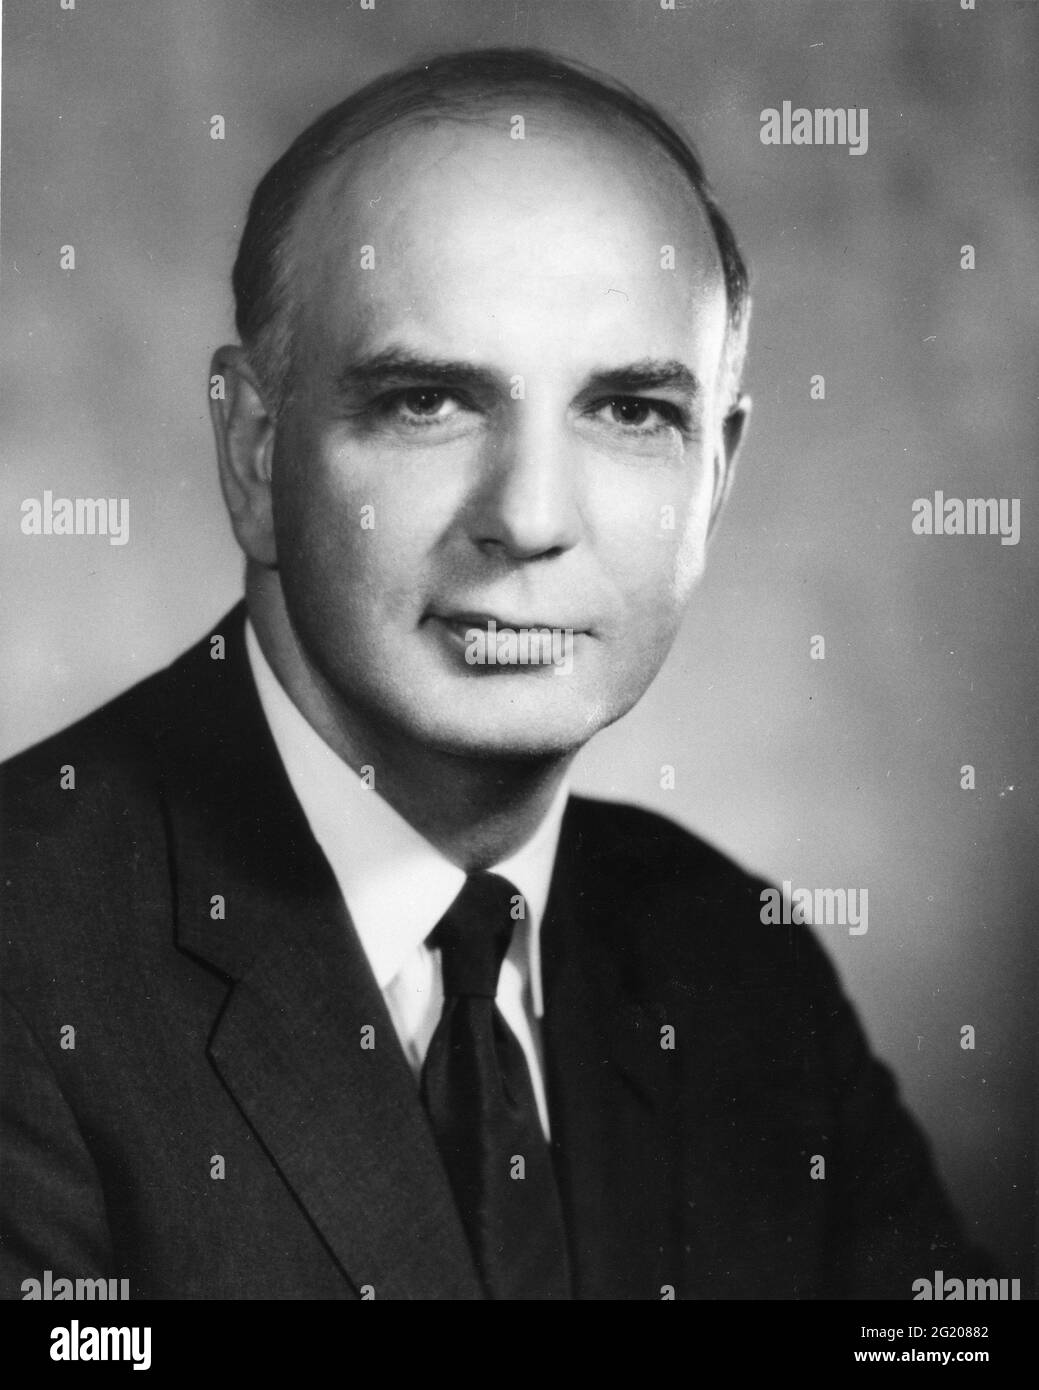 Paul A Volcker (1927-2019), American economist and Under Secretary for Monetary Affairs in the US Department of the Treasury from 1969-1974, Washington, DC, 1972. (Photo by Department of the Treasury/RBM Vintage Images) Stock Photo